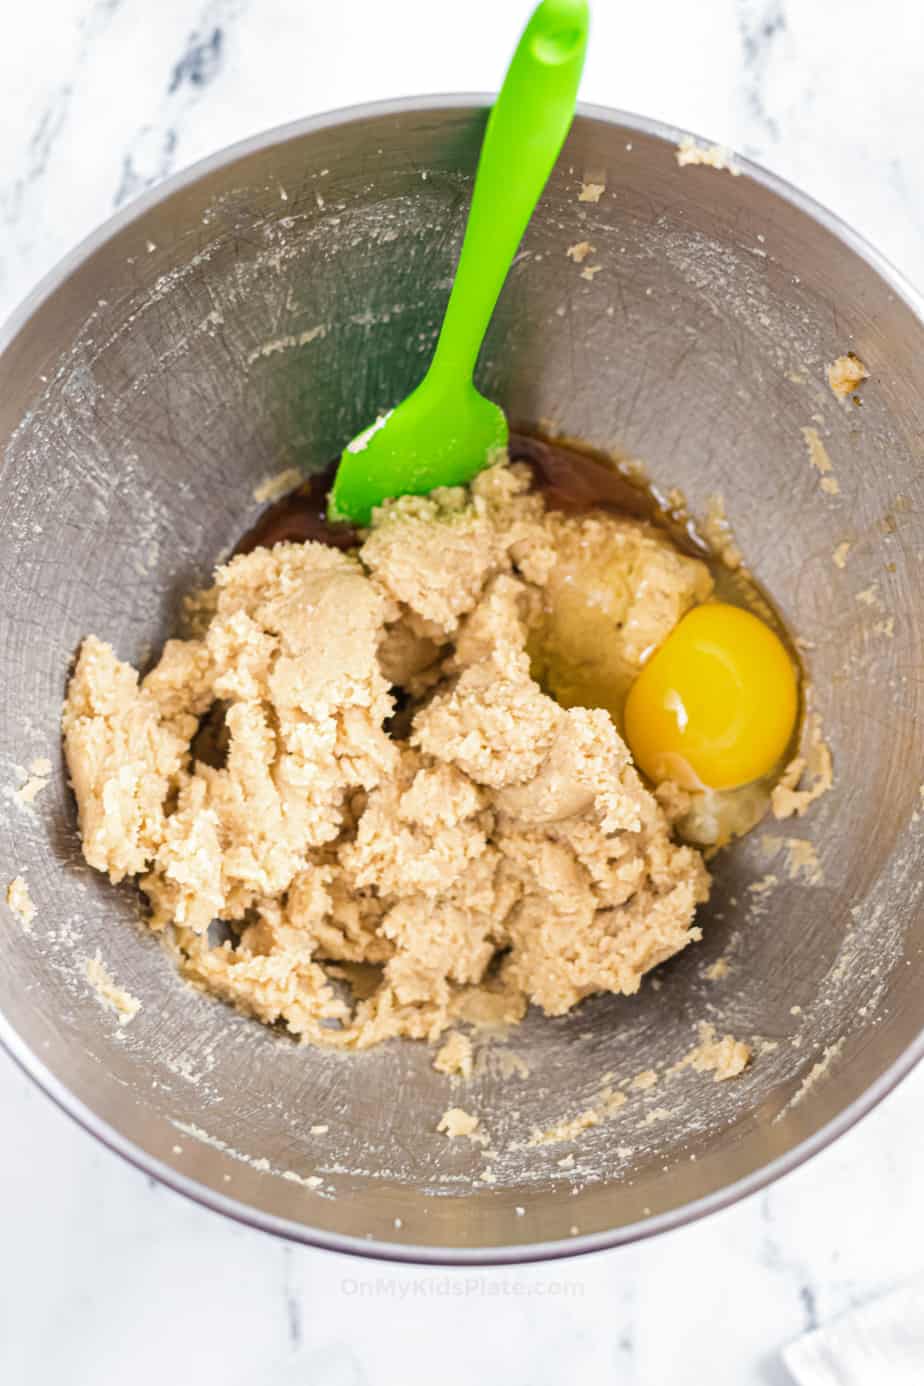 Eggs and vanilla being mixed into cookie dough batter in a bowl.